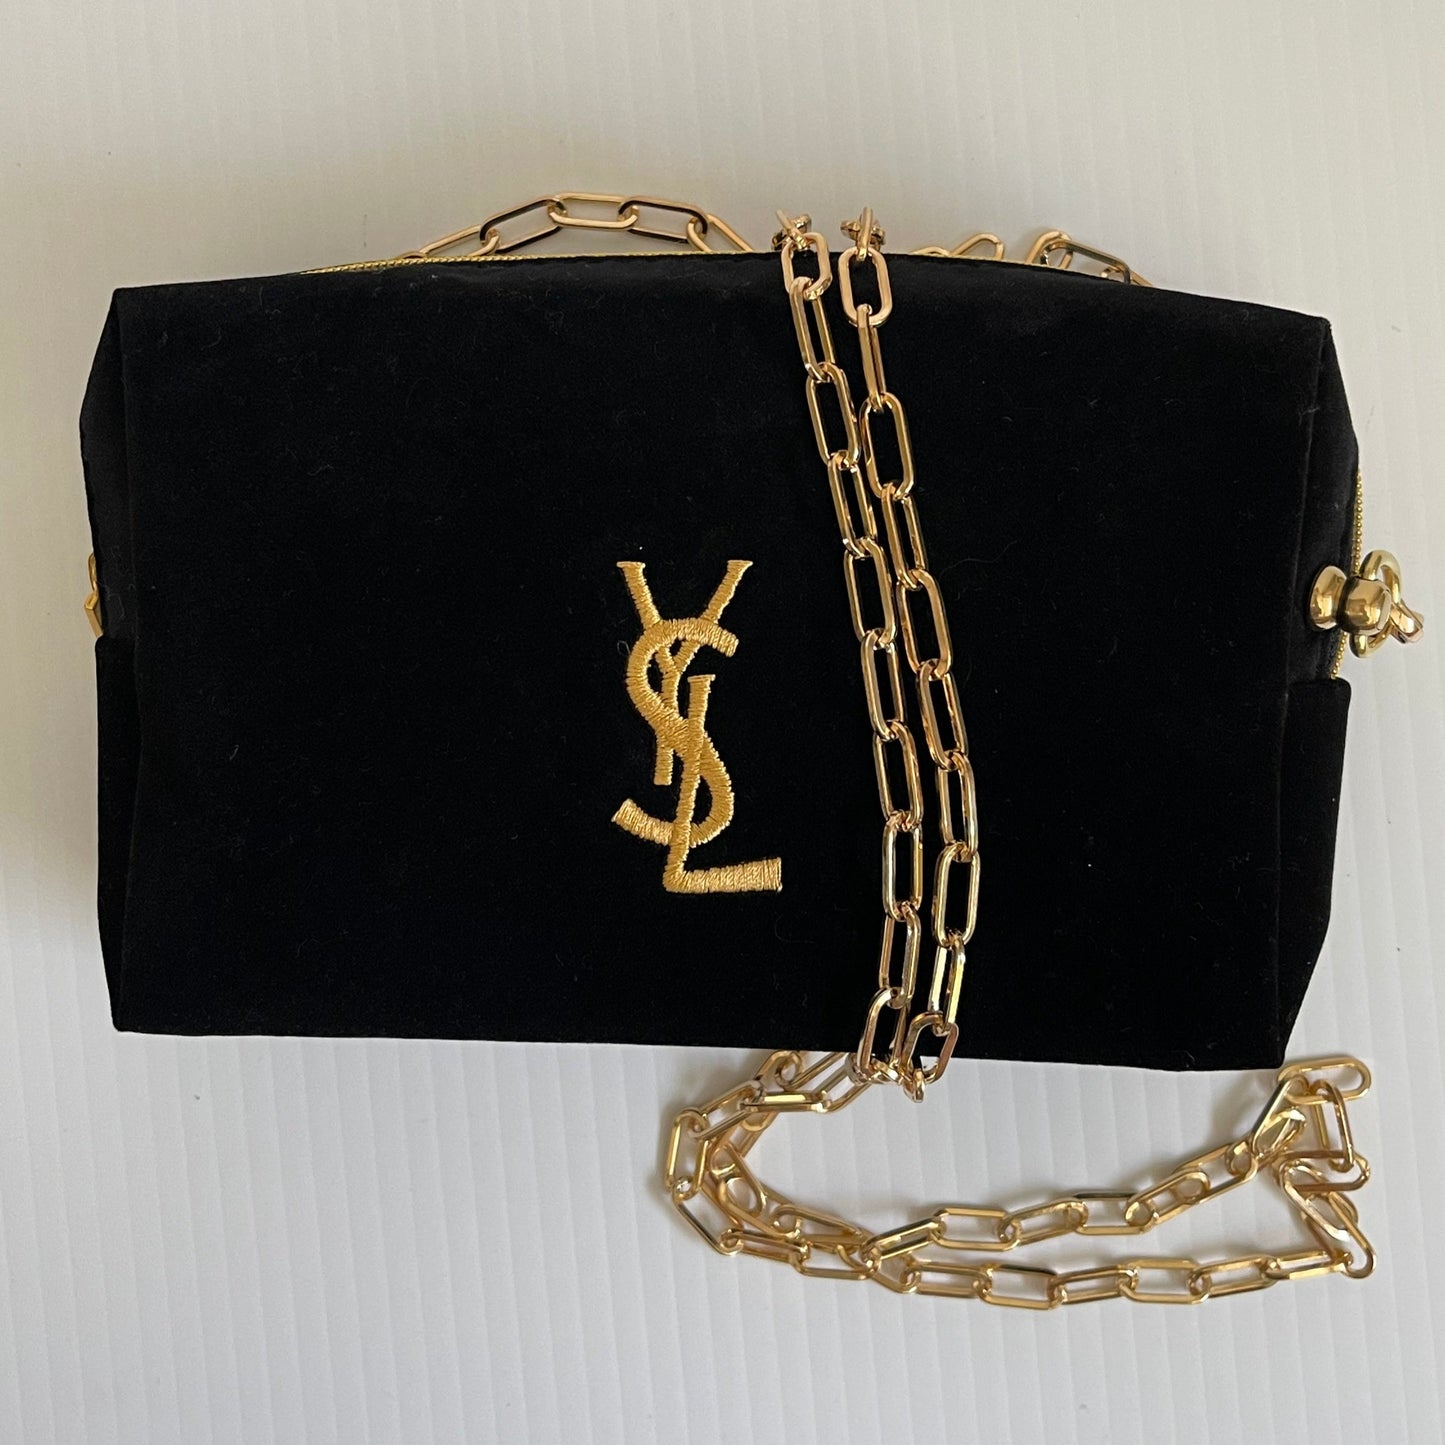 YSL Gift Cosmetic Pouch - Custom Made